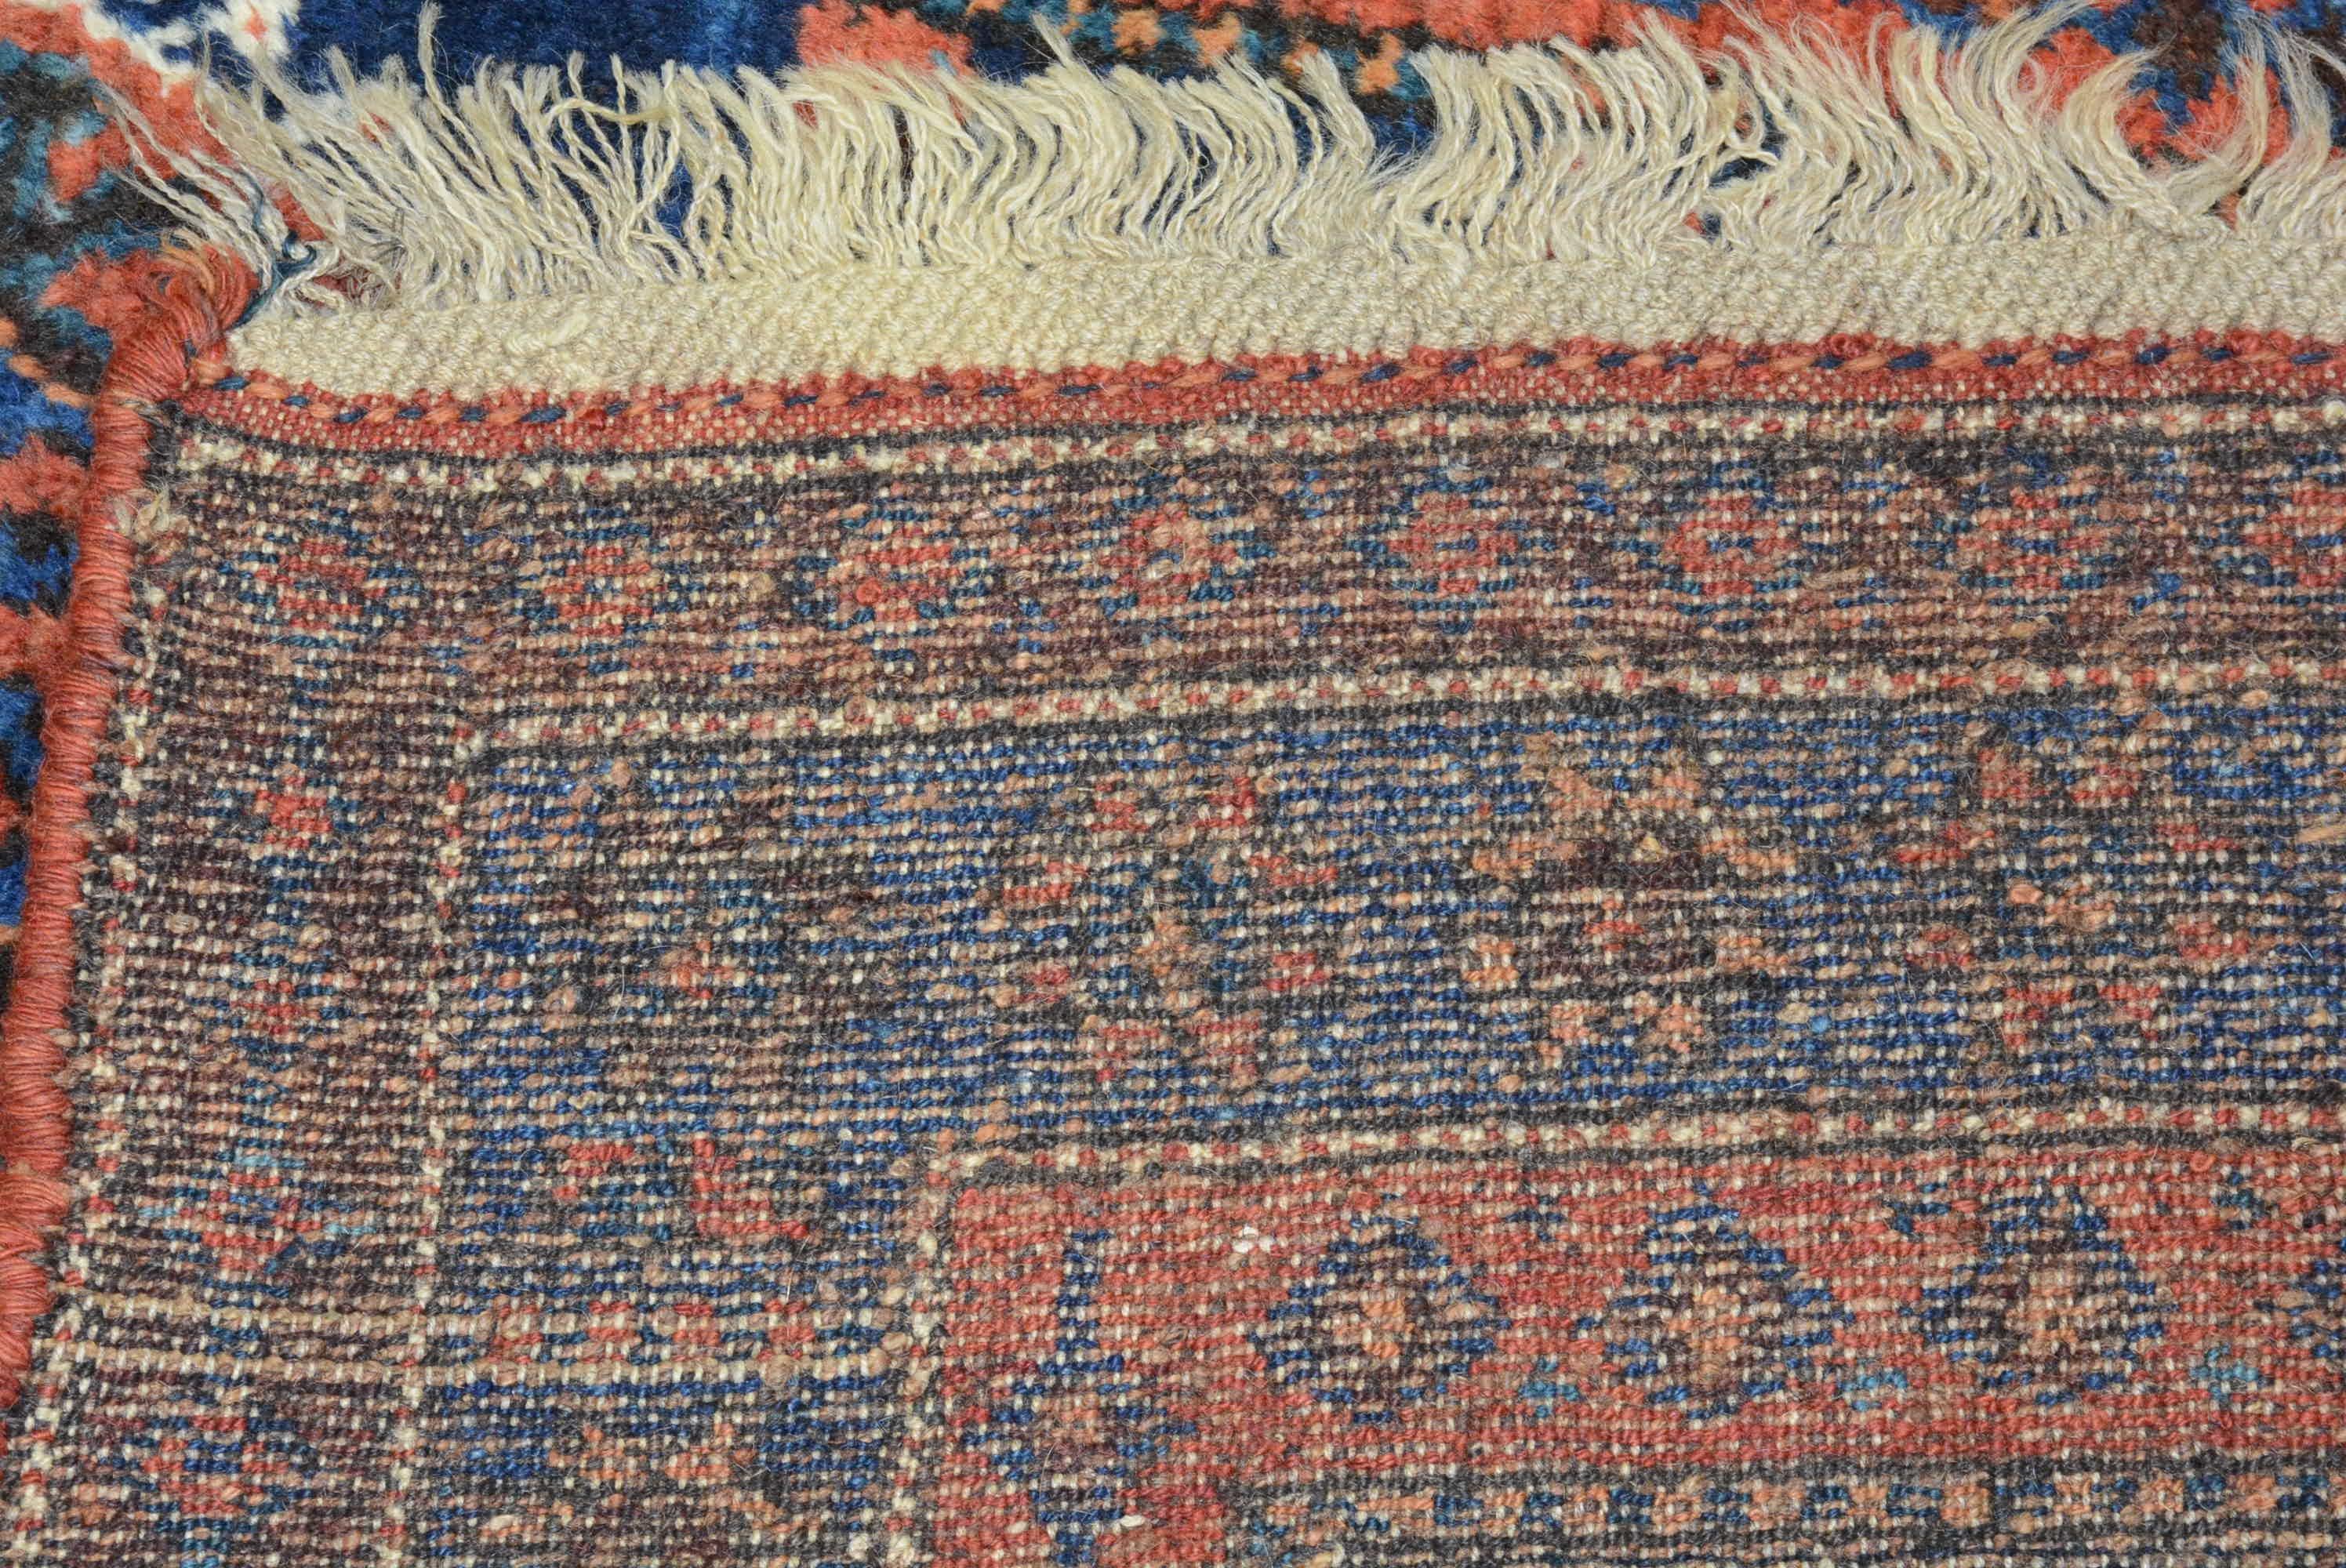 This antique Kurdish rug from western Persia was woven in the late 19th century. The repeat pattern of hexagonal medallions on the indigo field are filled with stylized animal heads that were inspired by similar patterns utilized by neighboring